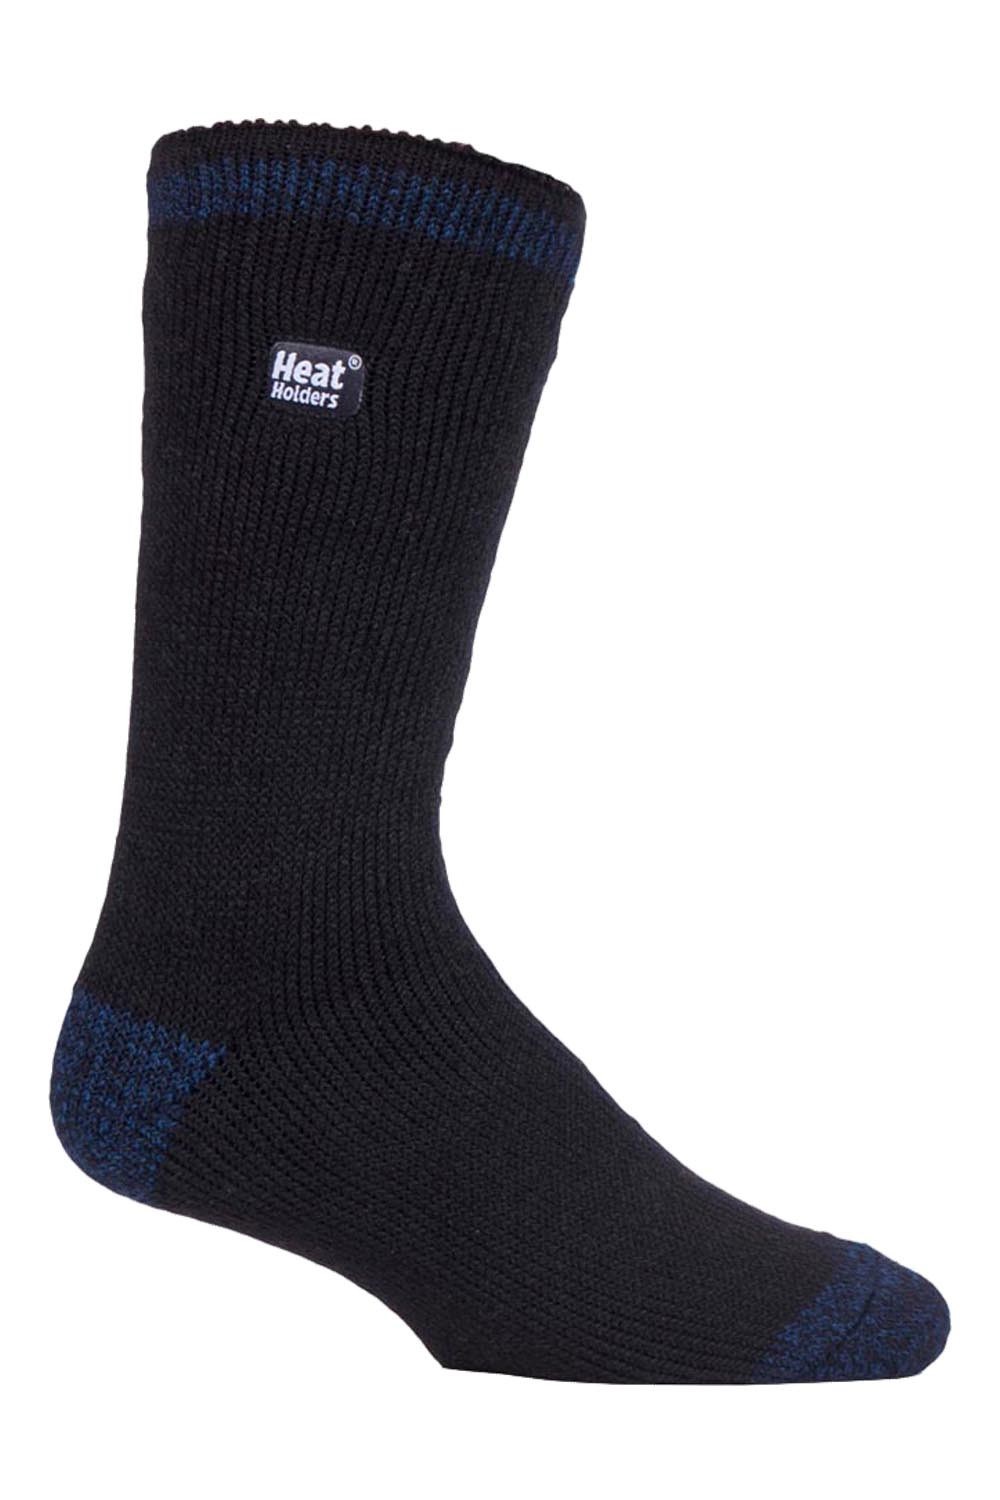 Mens Thick Patterned Thermal Socks